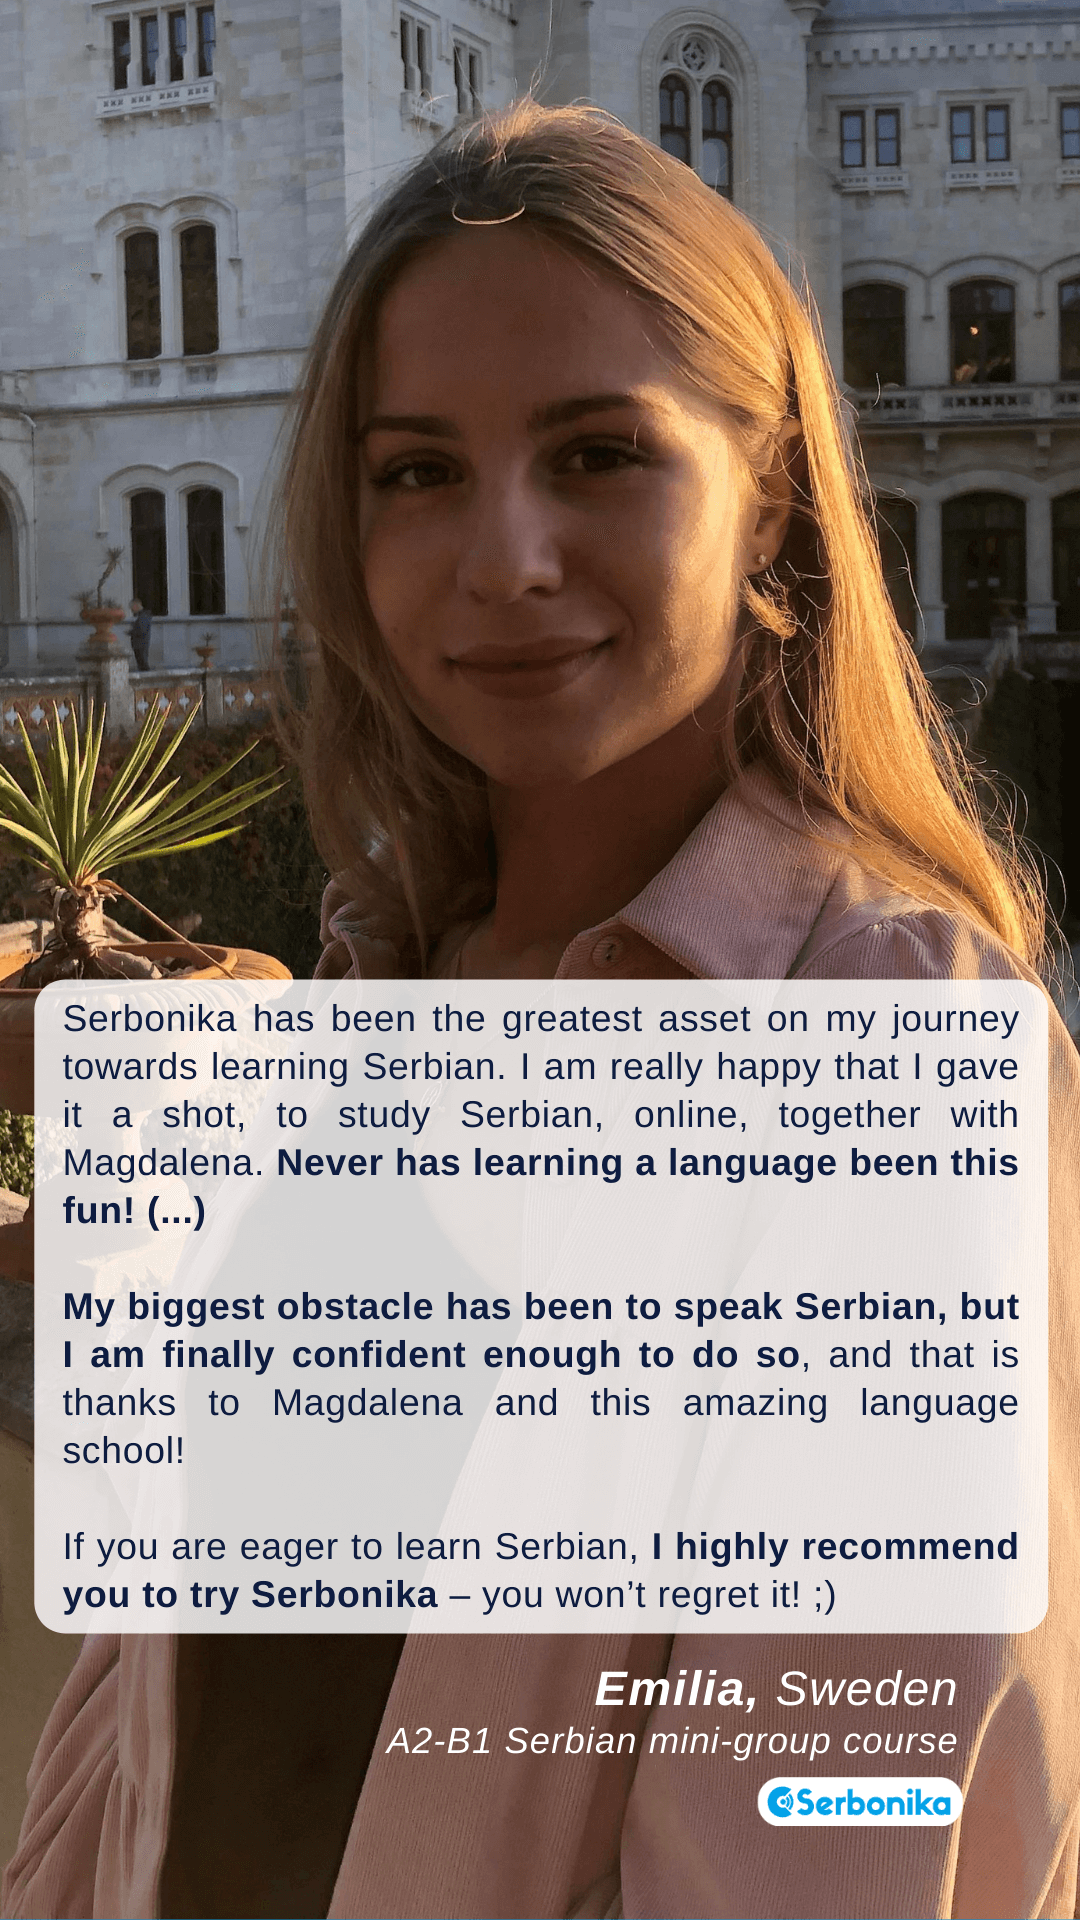 Emilia recommends group Serbian lessons at Serbonika